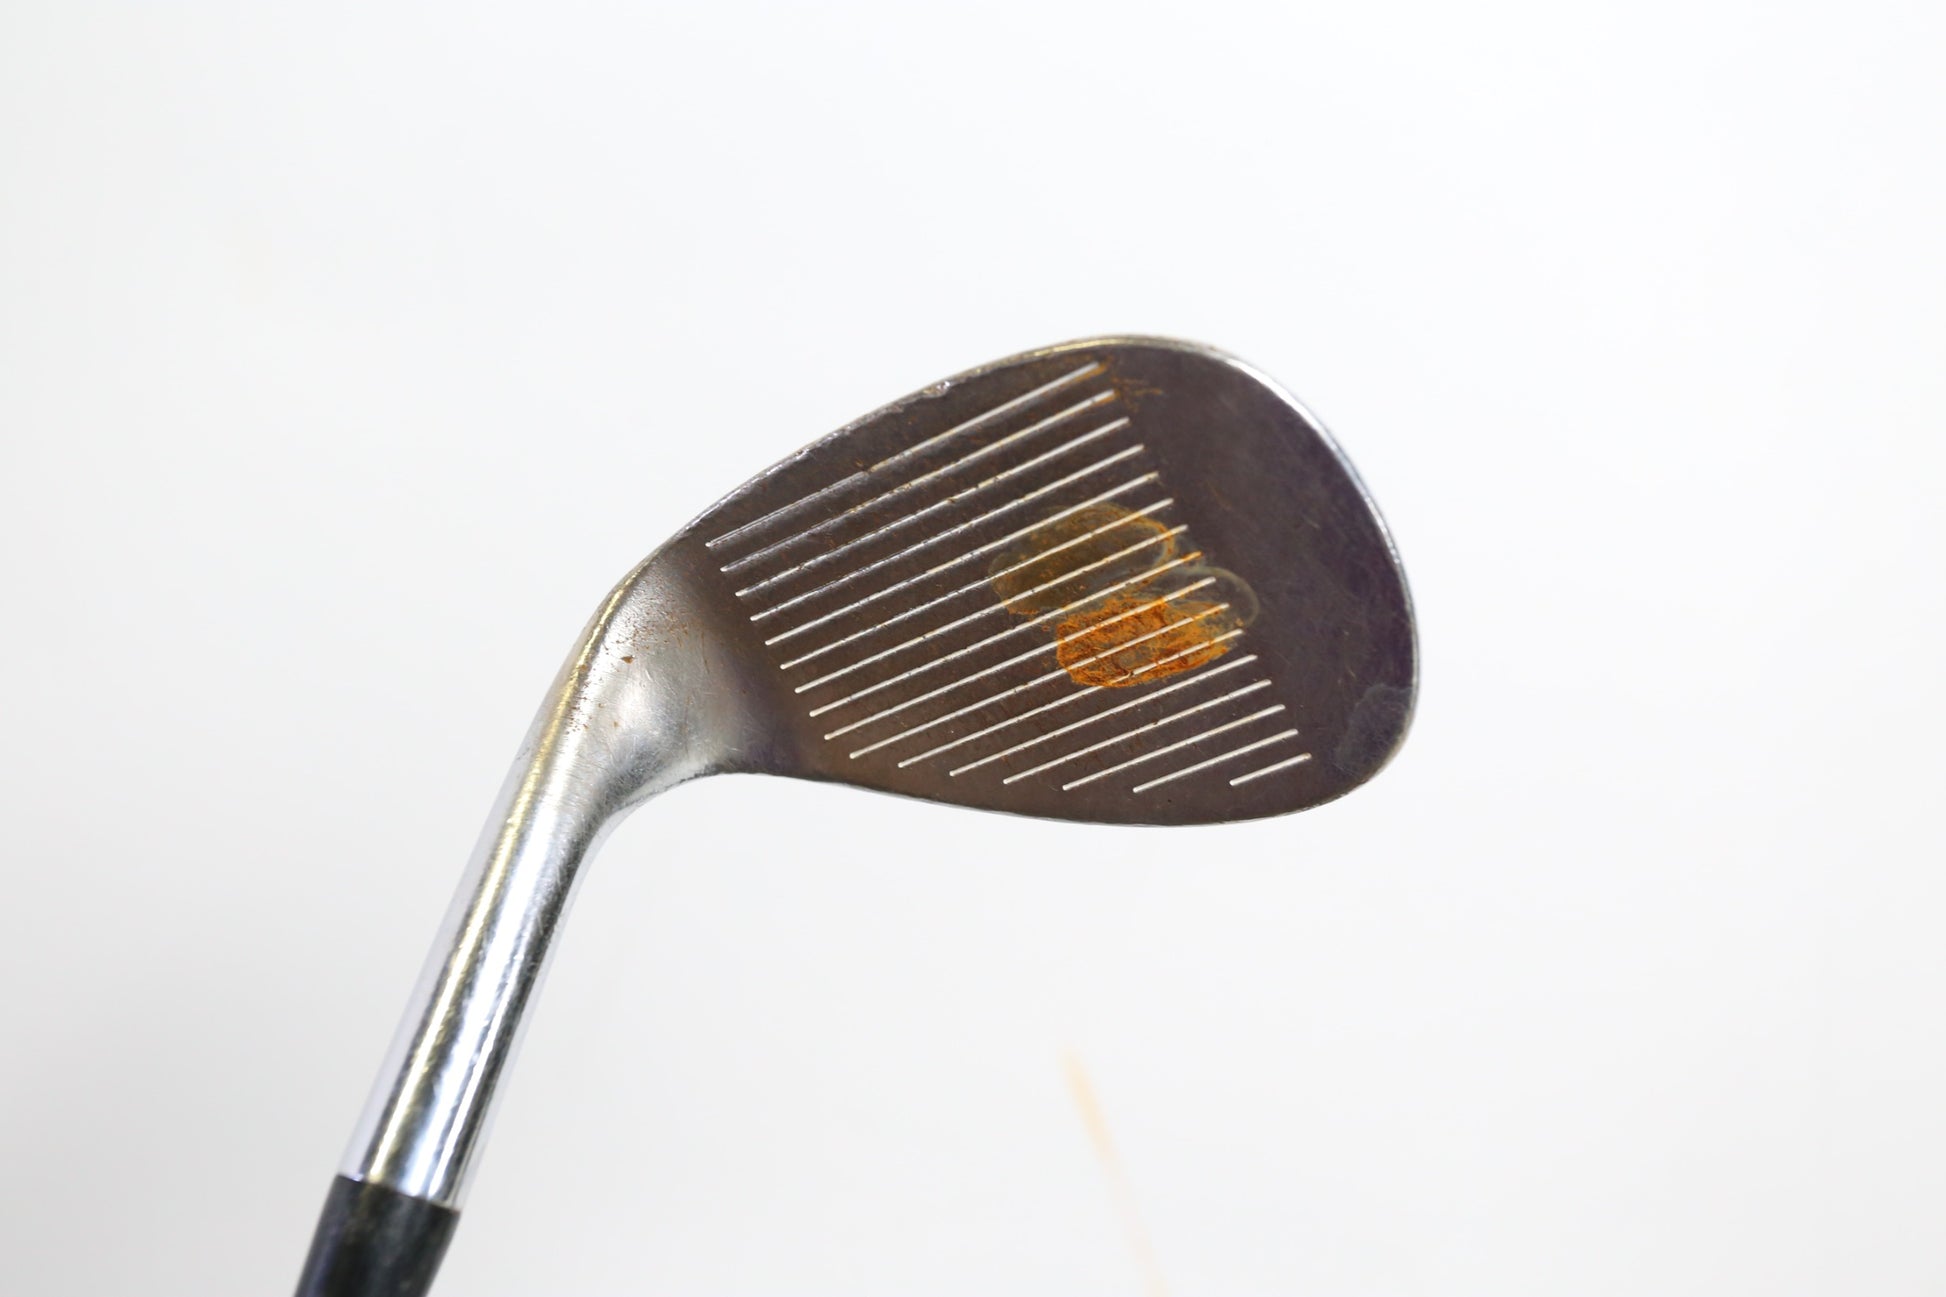 Used Cleveland 588 Tour Action Lob Wedge - Right-Handed - 57 Degrees - Stiff Flex-Next Round